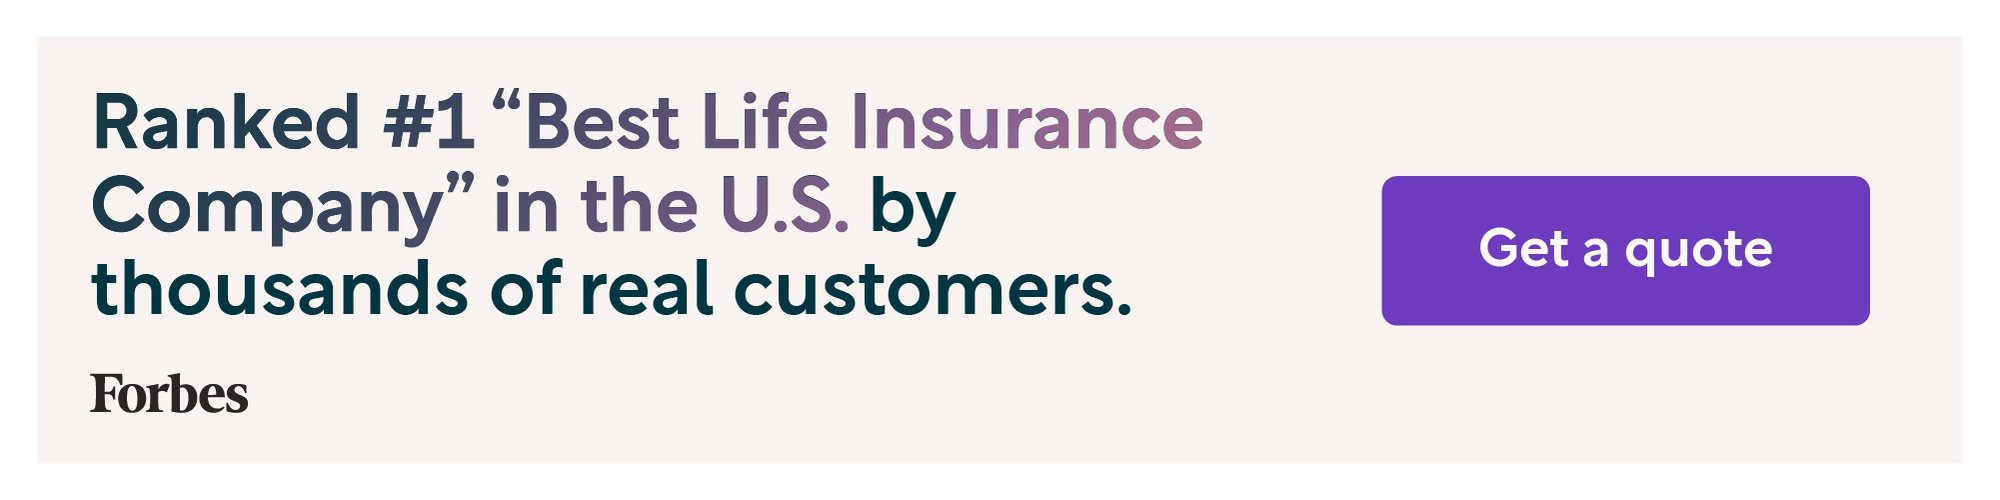 Forbes - Ranked #1 “Best Life Insurance Company” in the U.S. by thousands of real customers. Get a quote.